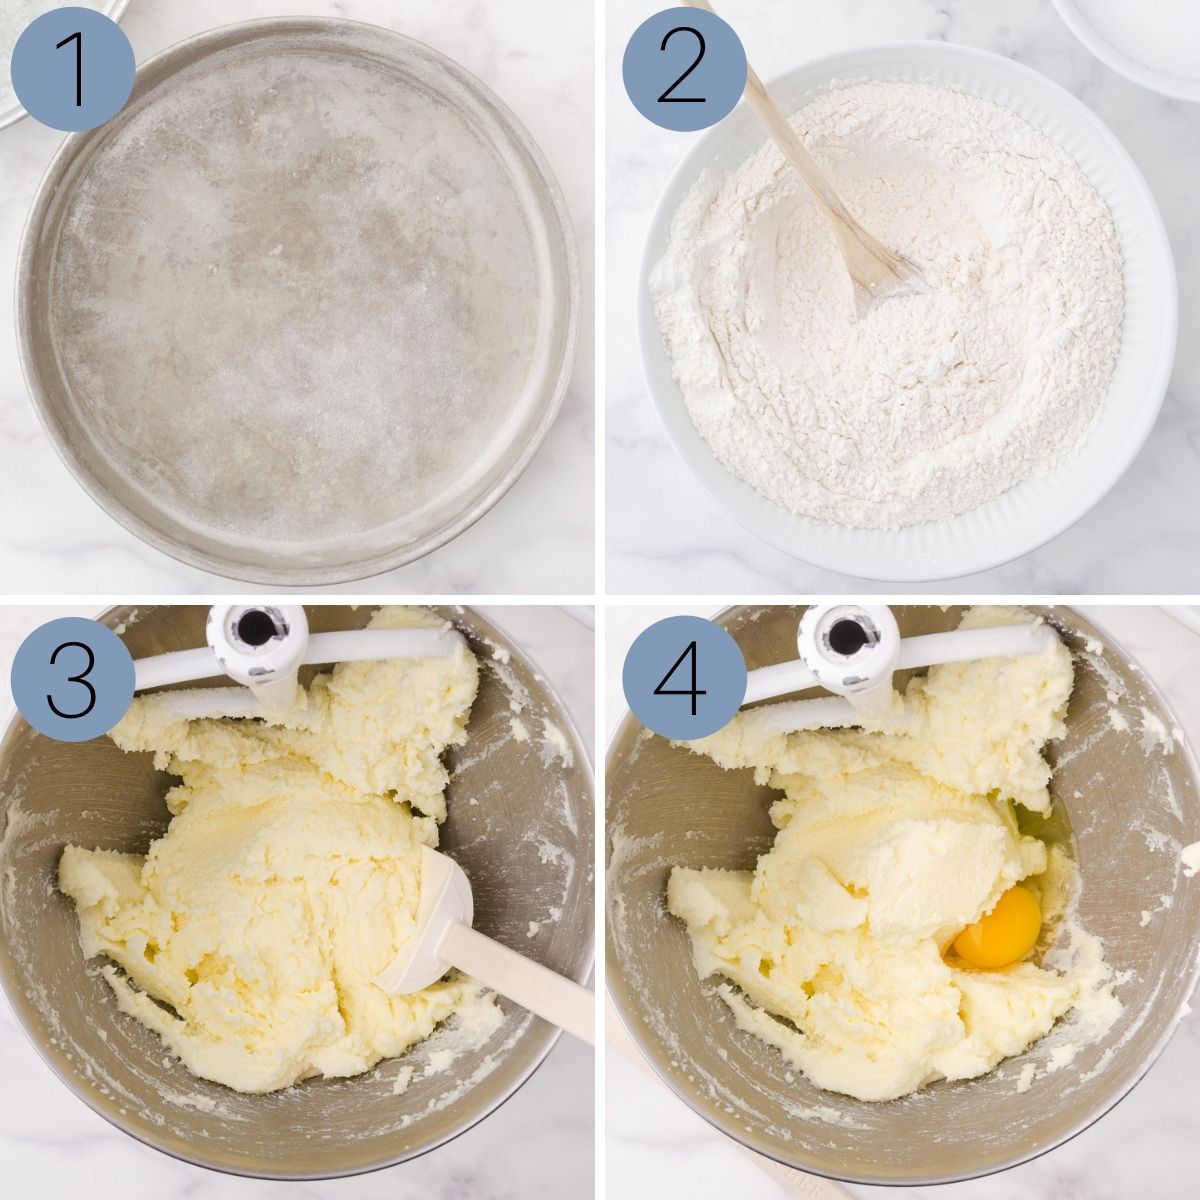 instructions for the first 4 steps of the cake batter